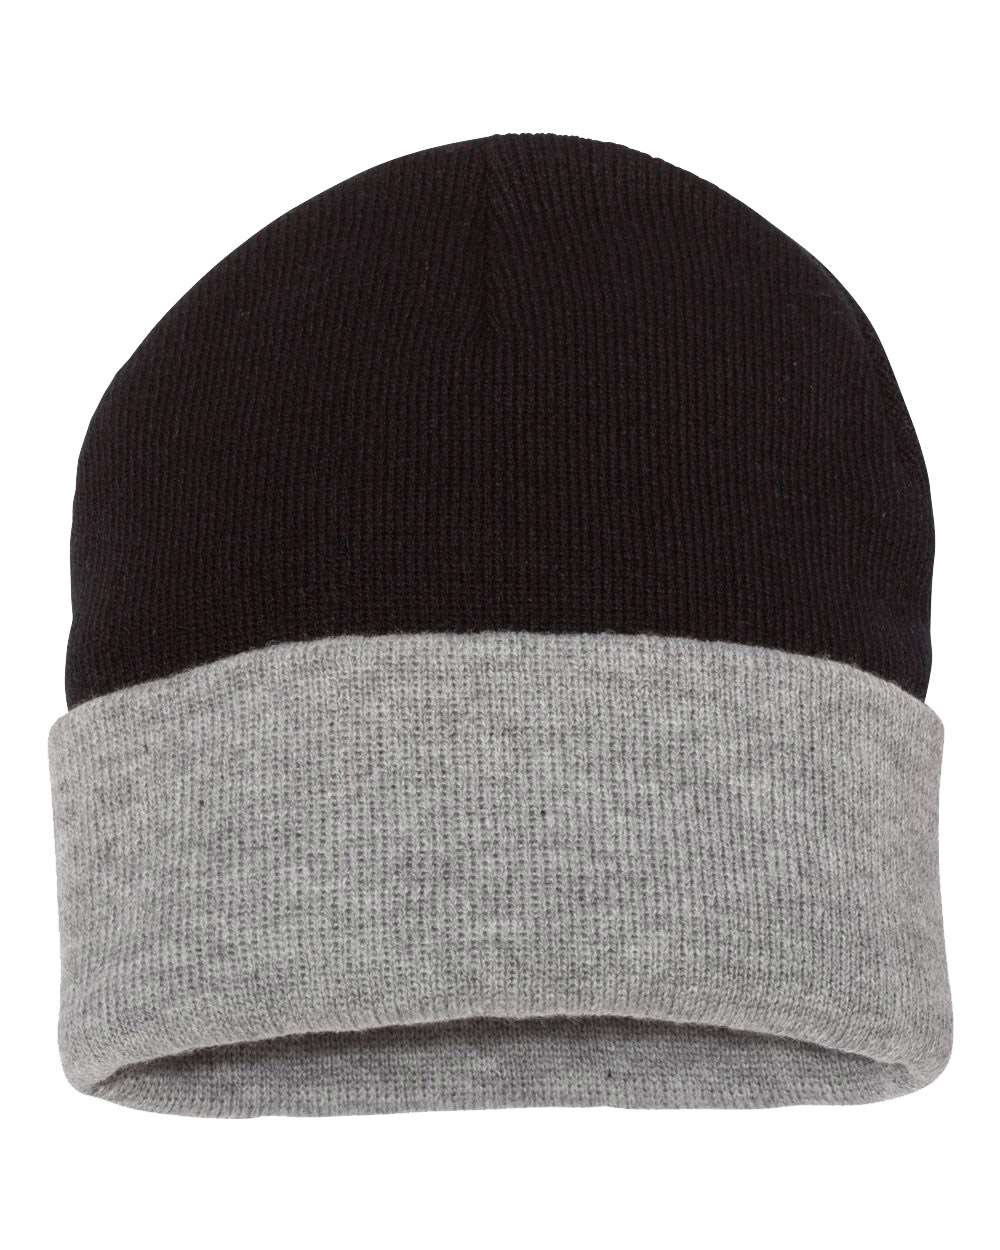 Sportsman Colorblocked 12" Cuffed Beanie SP12T #color_Black/ Heather